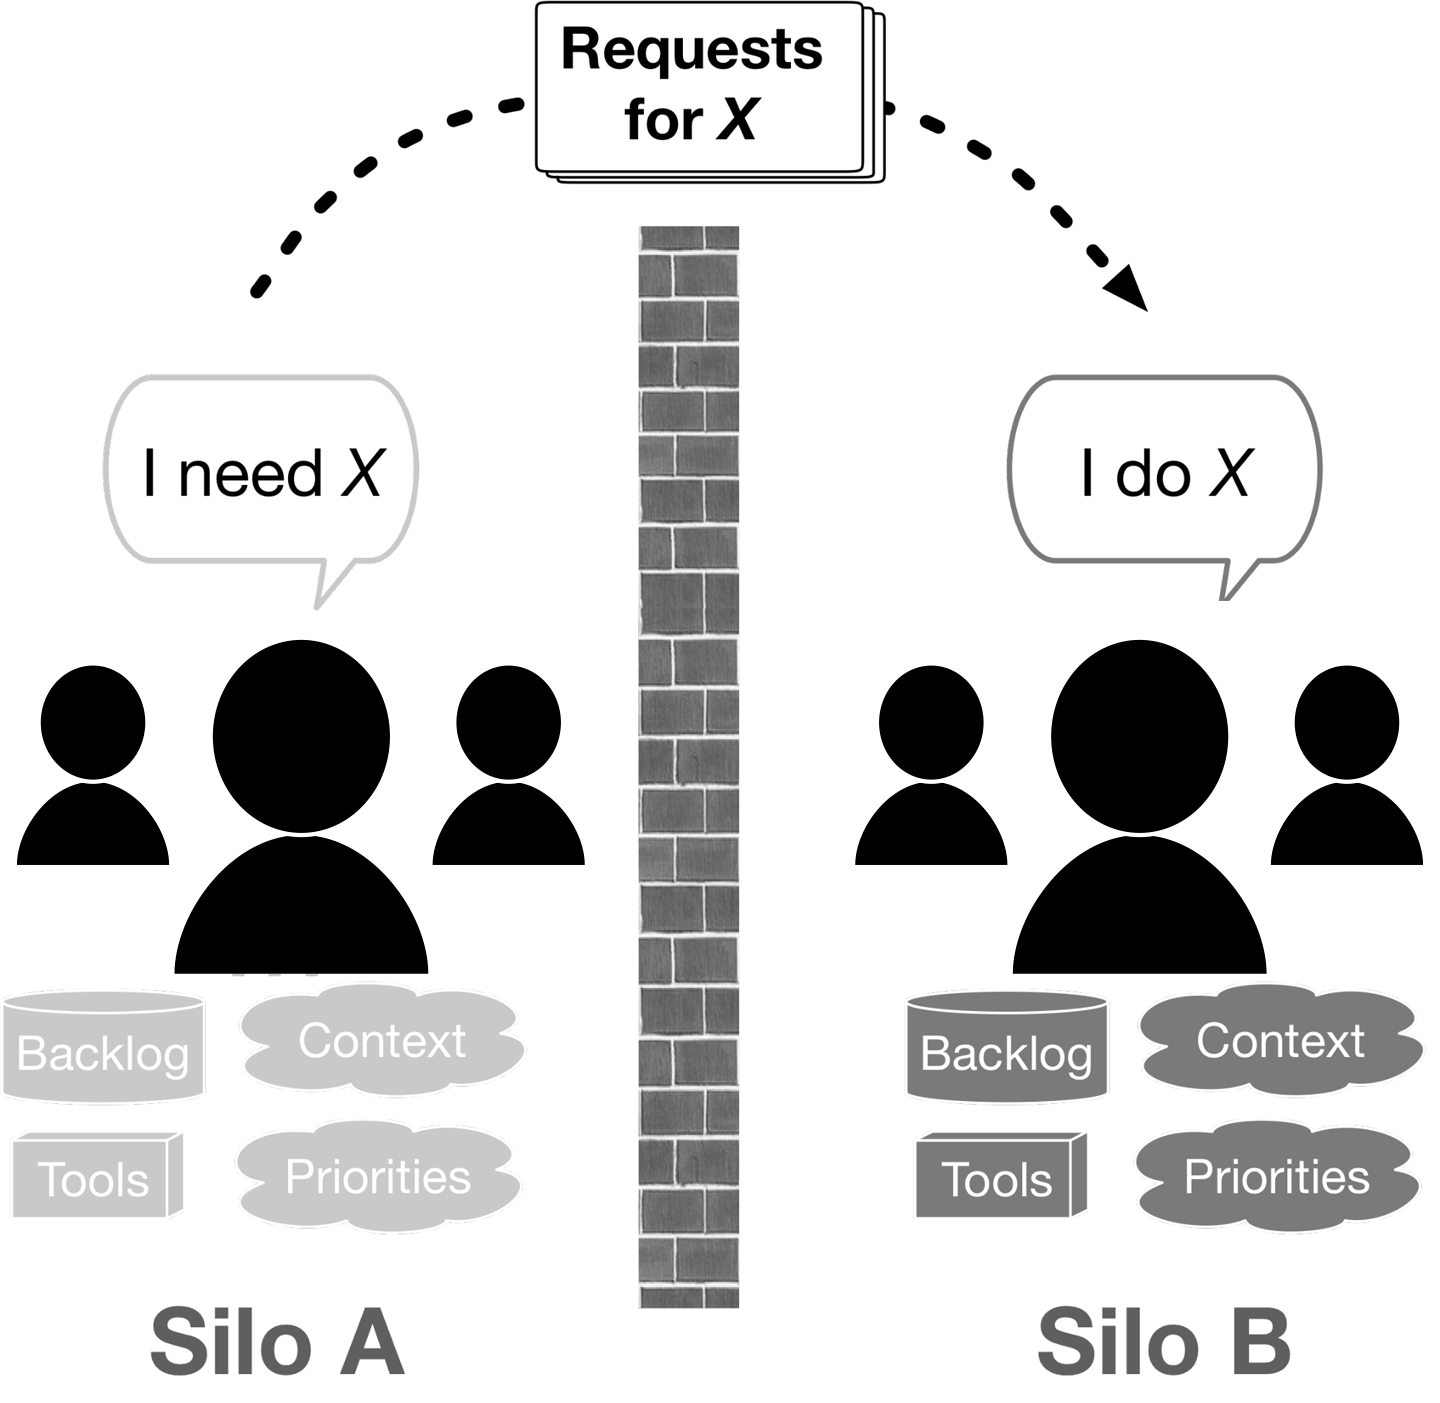 Silos describe a way of disconnected working rather than a specific organizational structure.